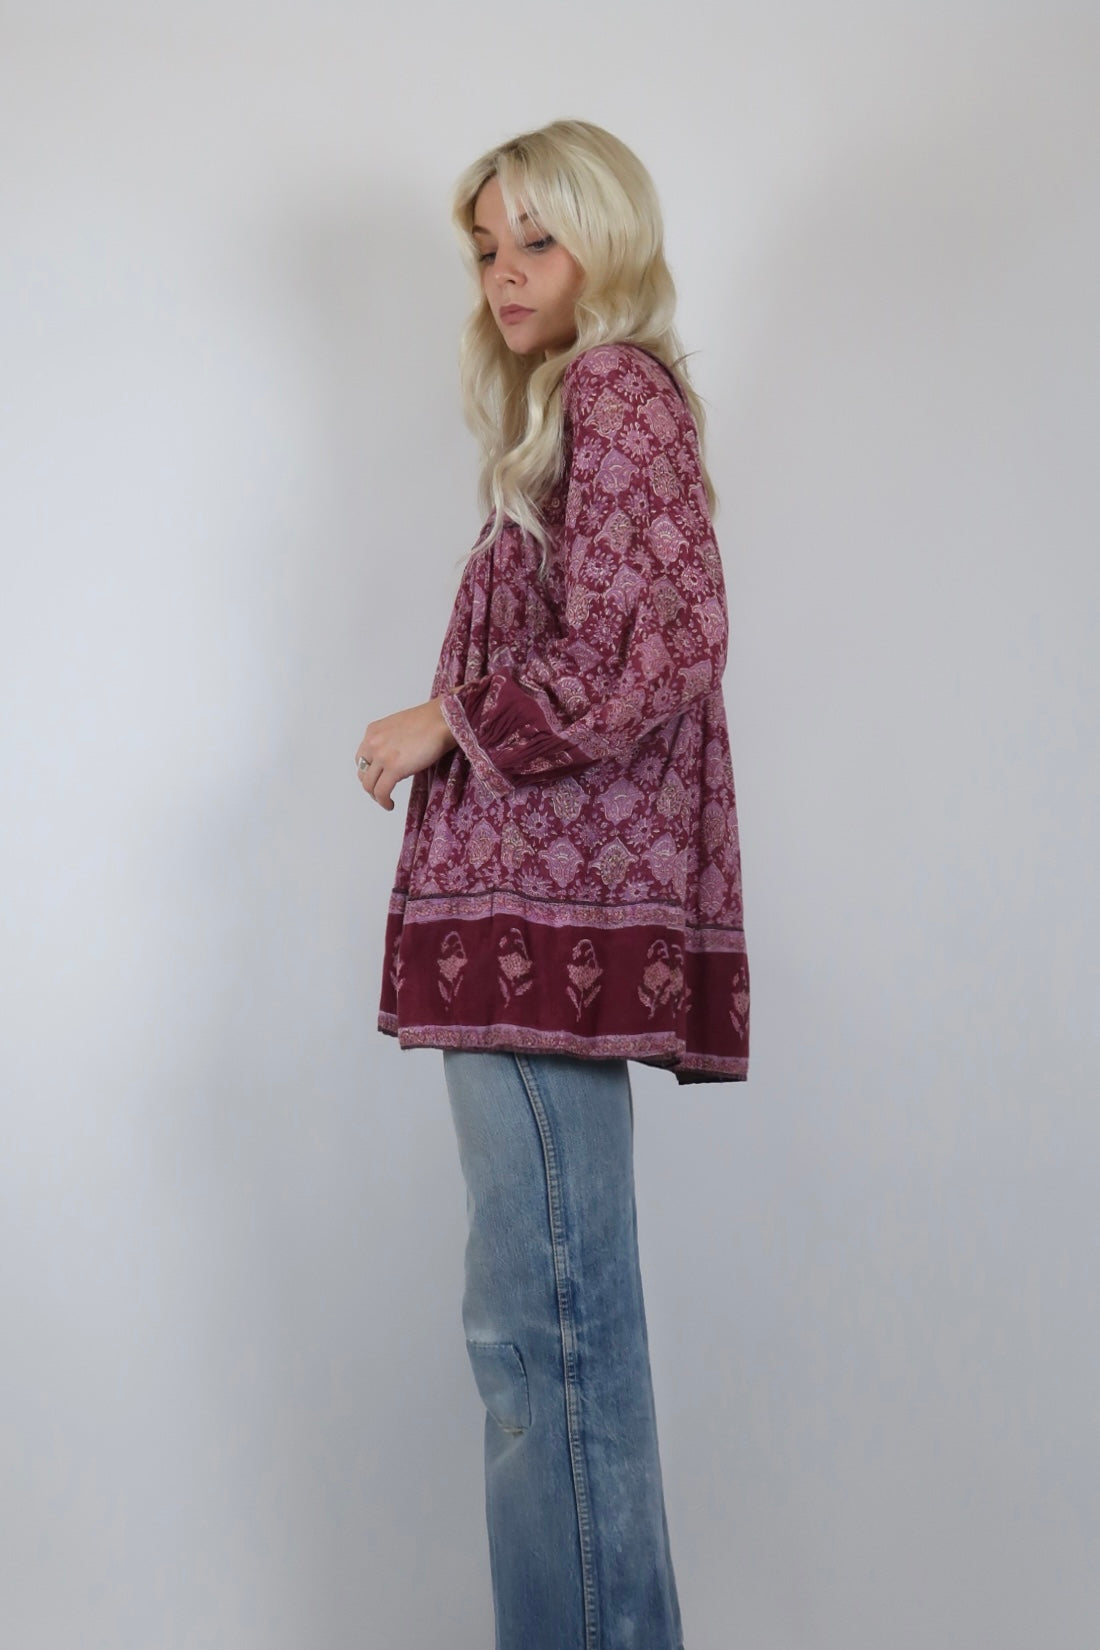 1970s Indian tunic blouse